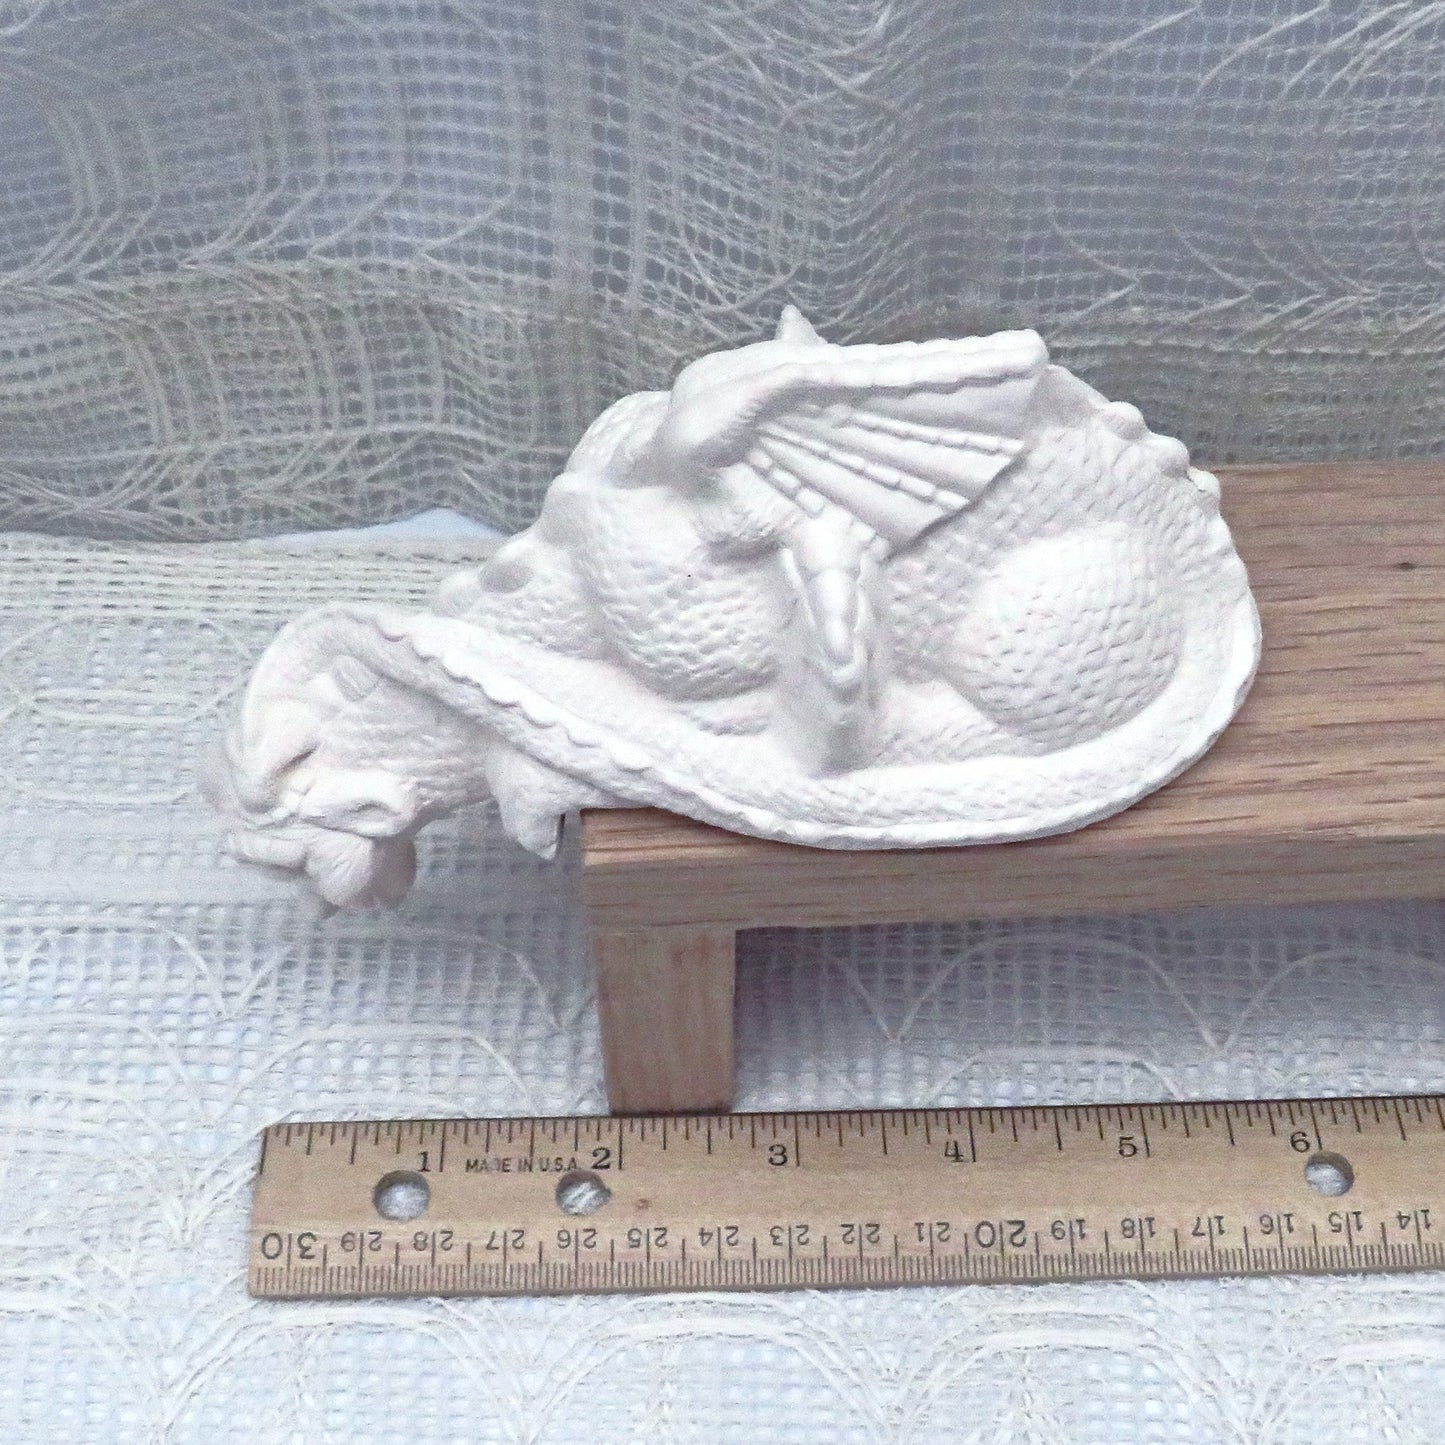 Unpainted Dragon Figurine, Unpainted Ceramic Dragon Statue, Paintable Ceramic Dragon, Ceramics to Paint, Ready to Paint, Dragon Lover Gift